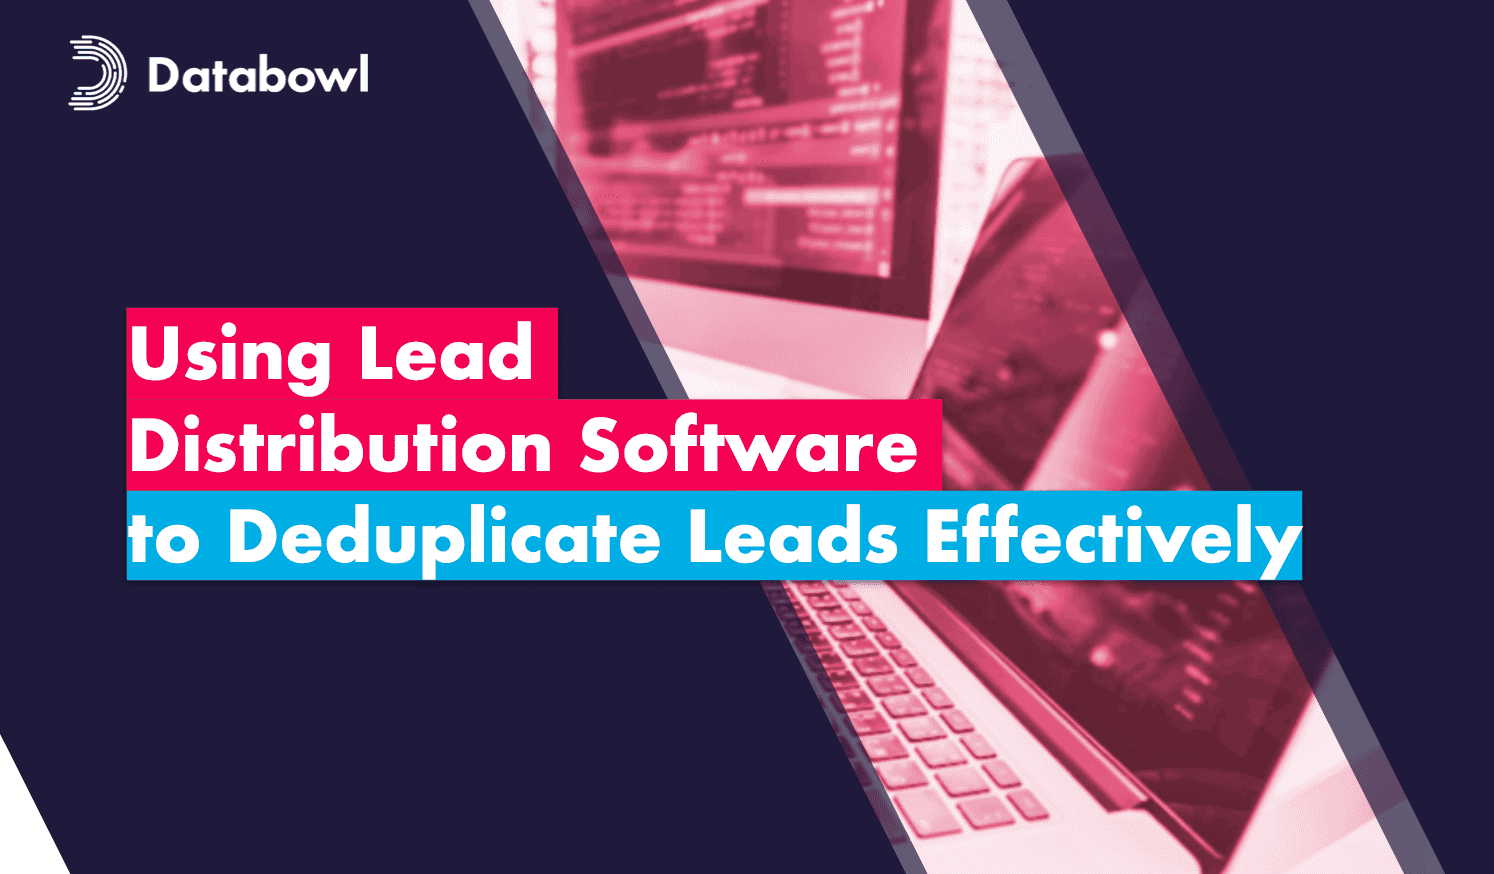 Using Lead Distribution Software to Deduplicate Leads Effectively